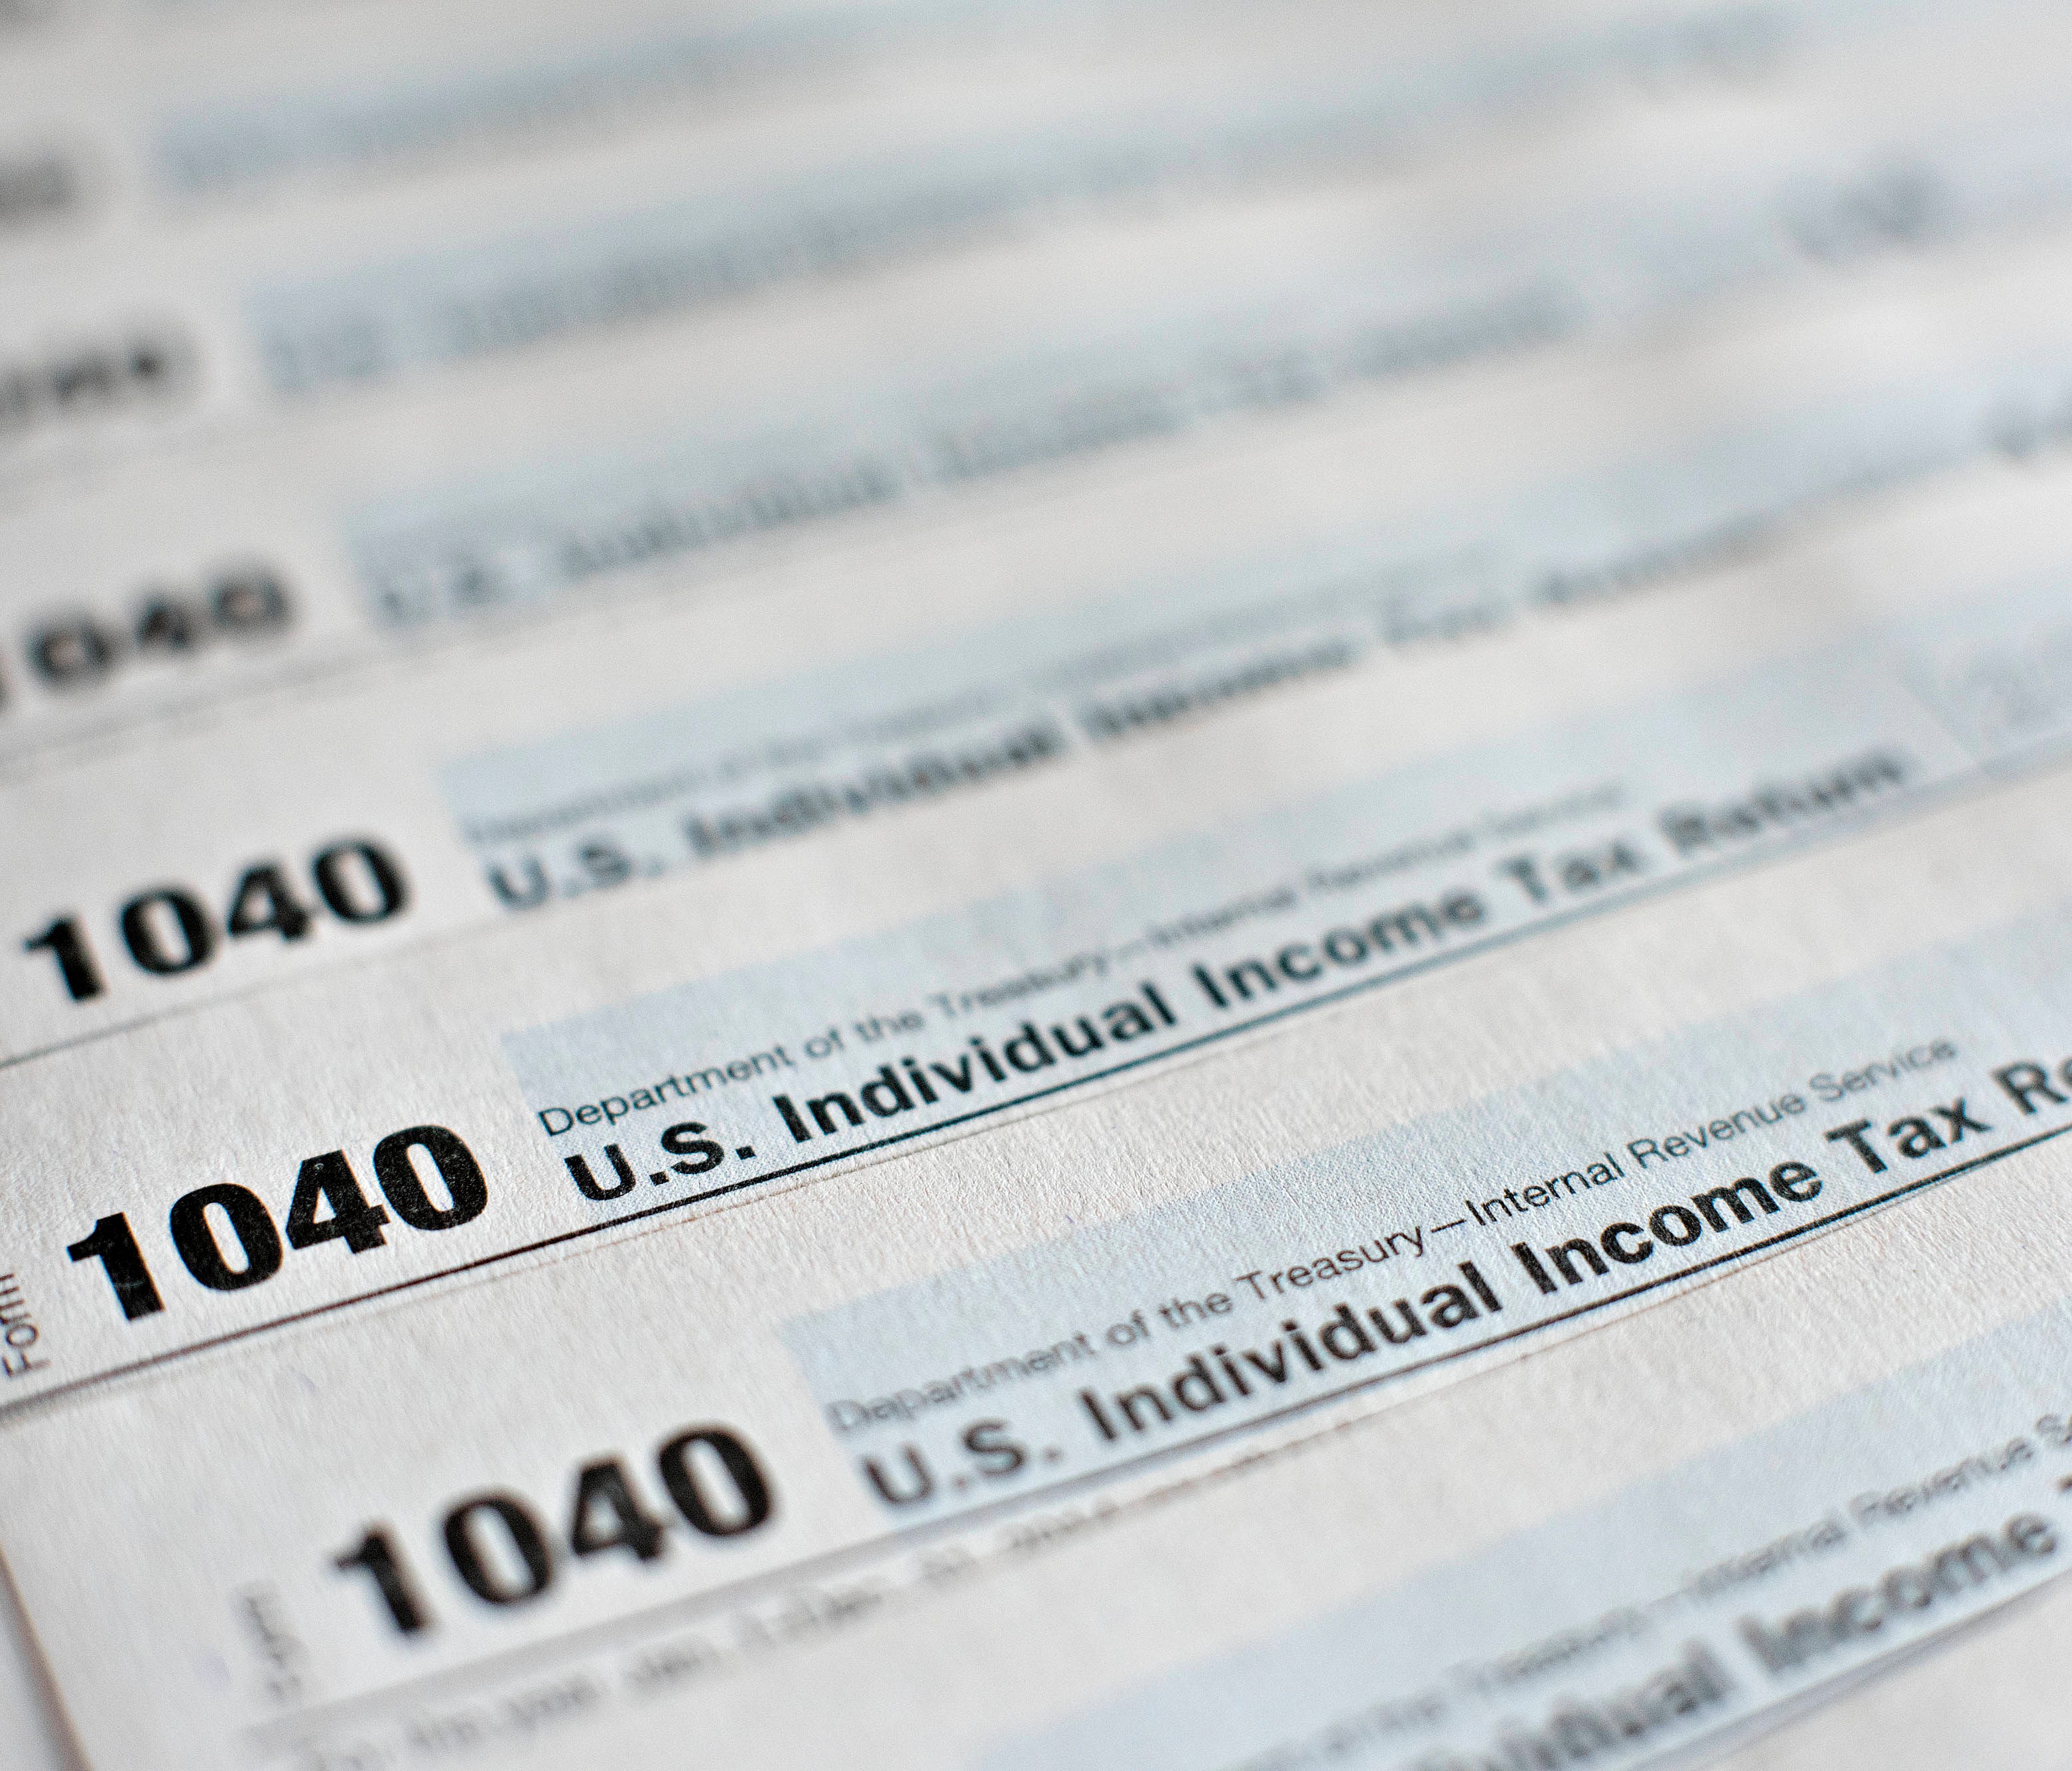 U.S. Department of the Treasury Internal Revenue Service (IRS) 1040 Individual Income Tax forms for the 2014 tax year are arranged for a photograph in Tiskilwa, Illinois, U.S., on Monday, March 16, 2015.